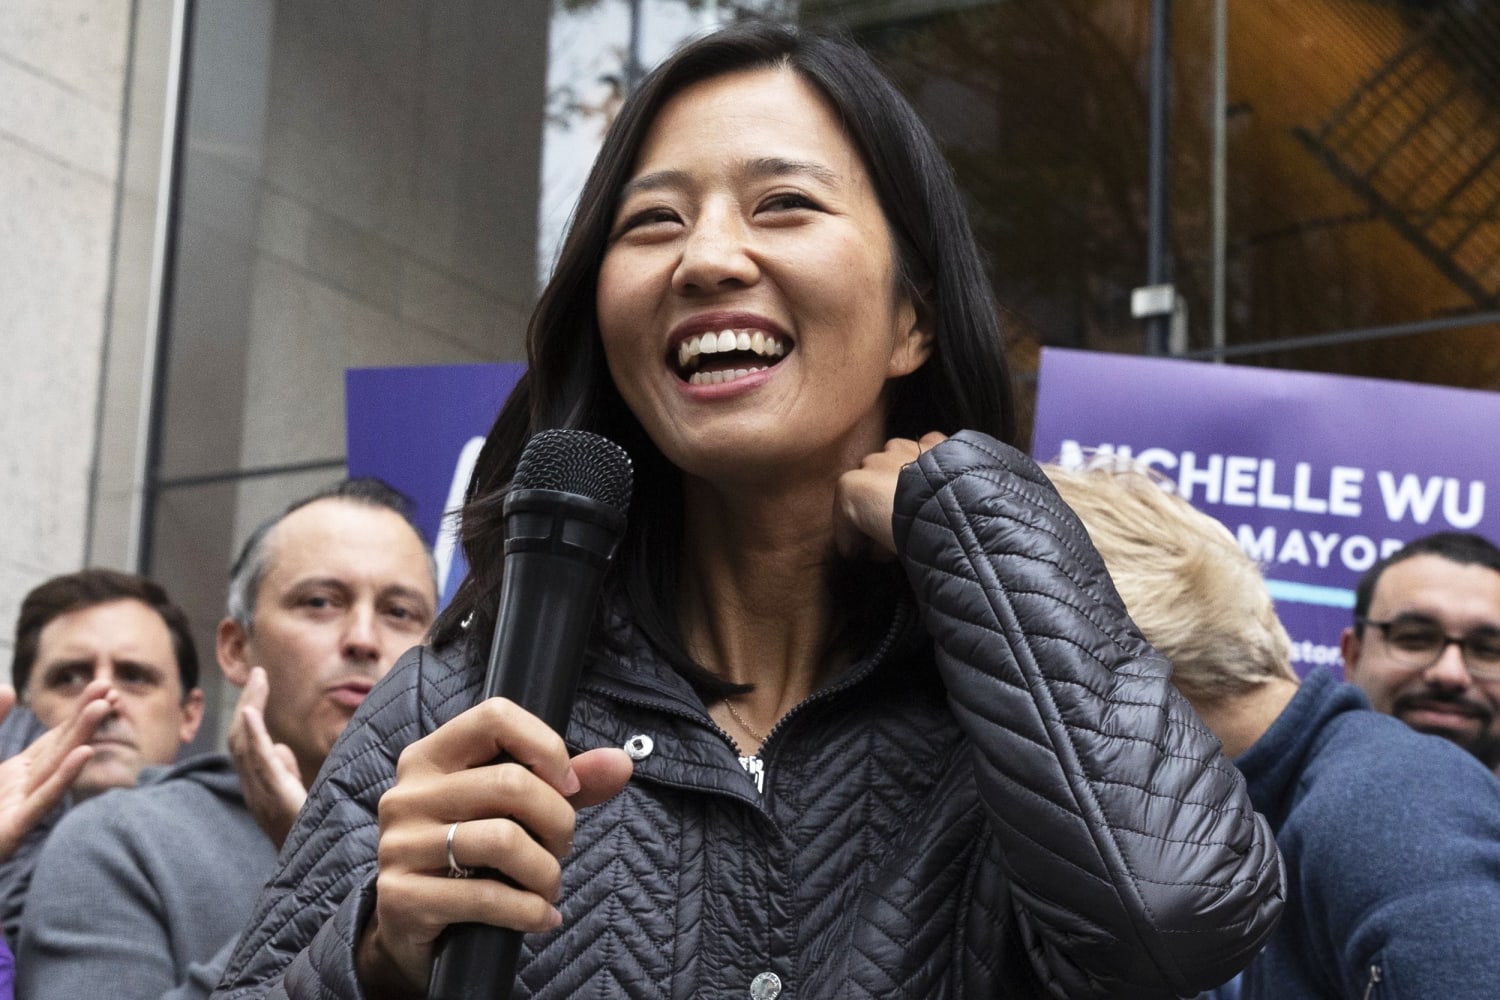 Michelle Wu becomes first woman and person of color elected mayor of Boston, AP projects